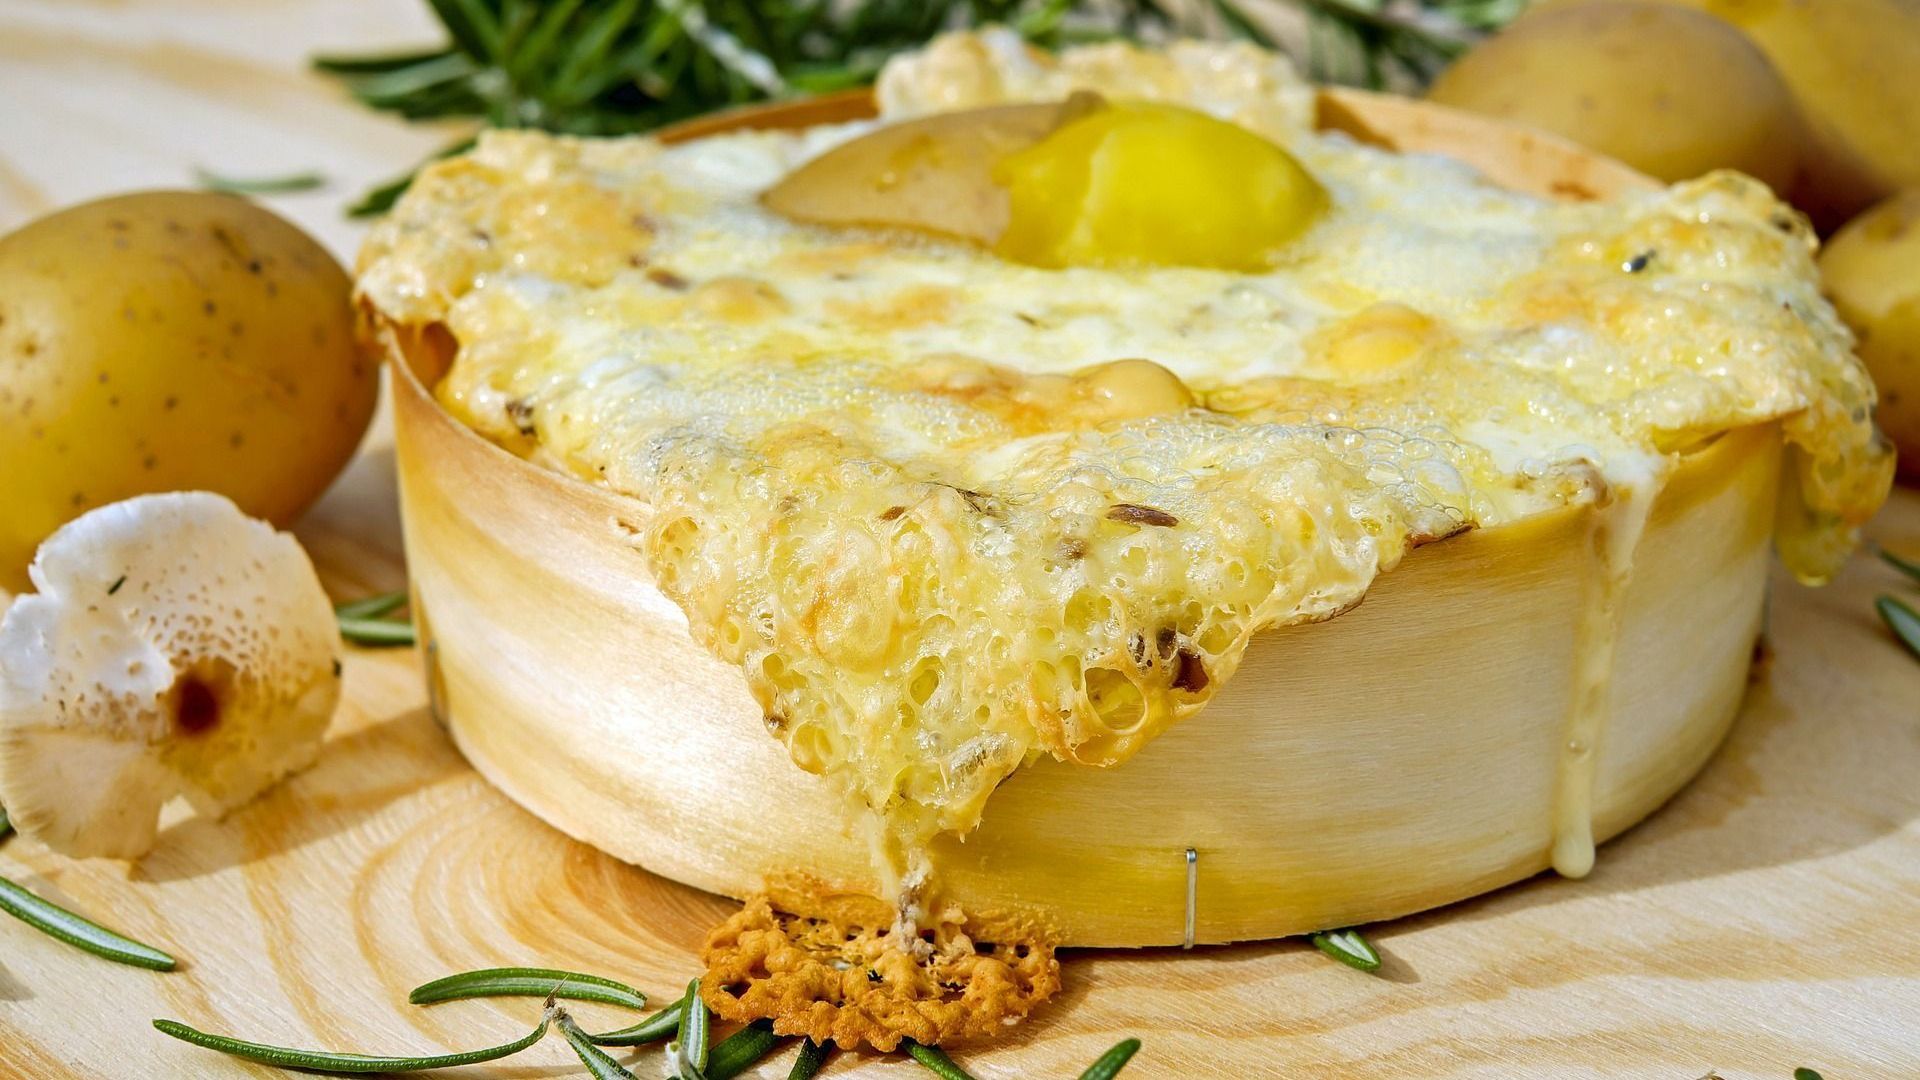 oven-baked-cheese-2817144_1920